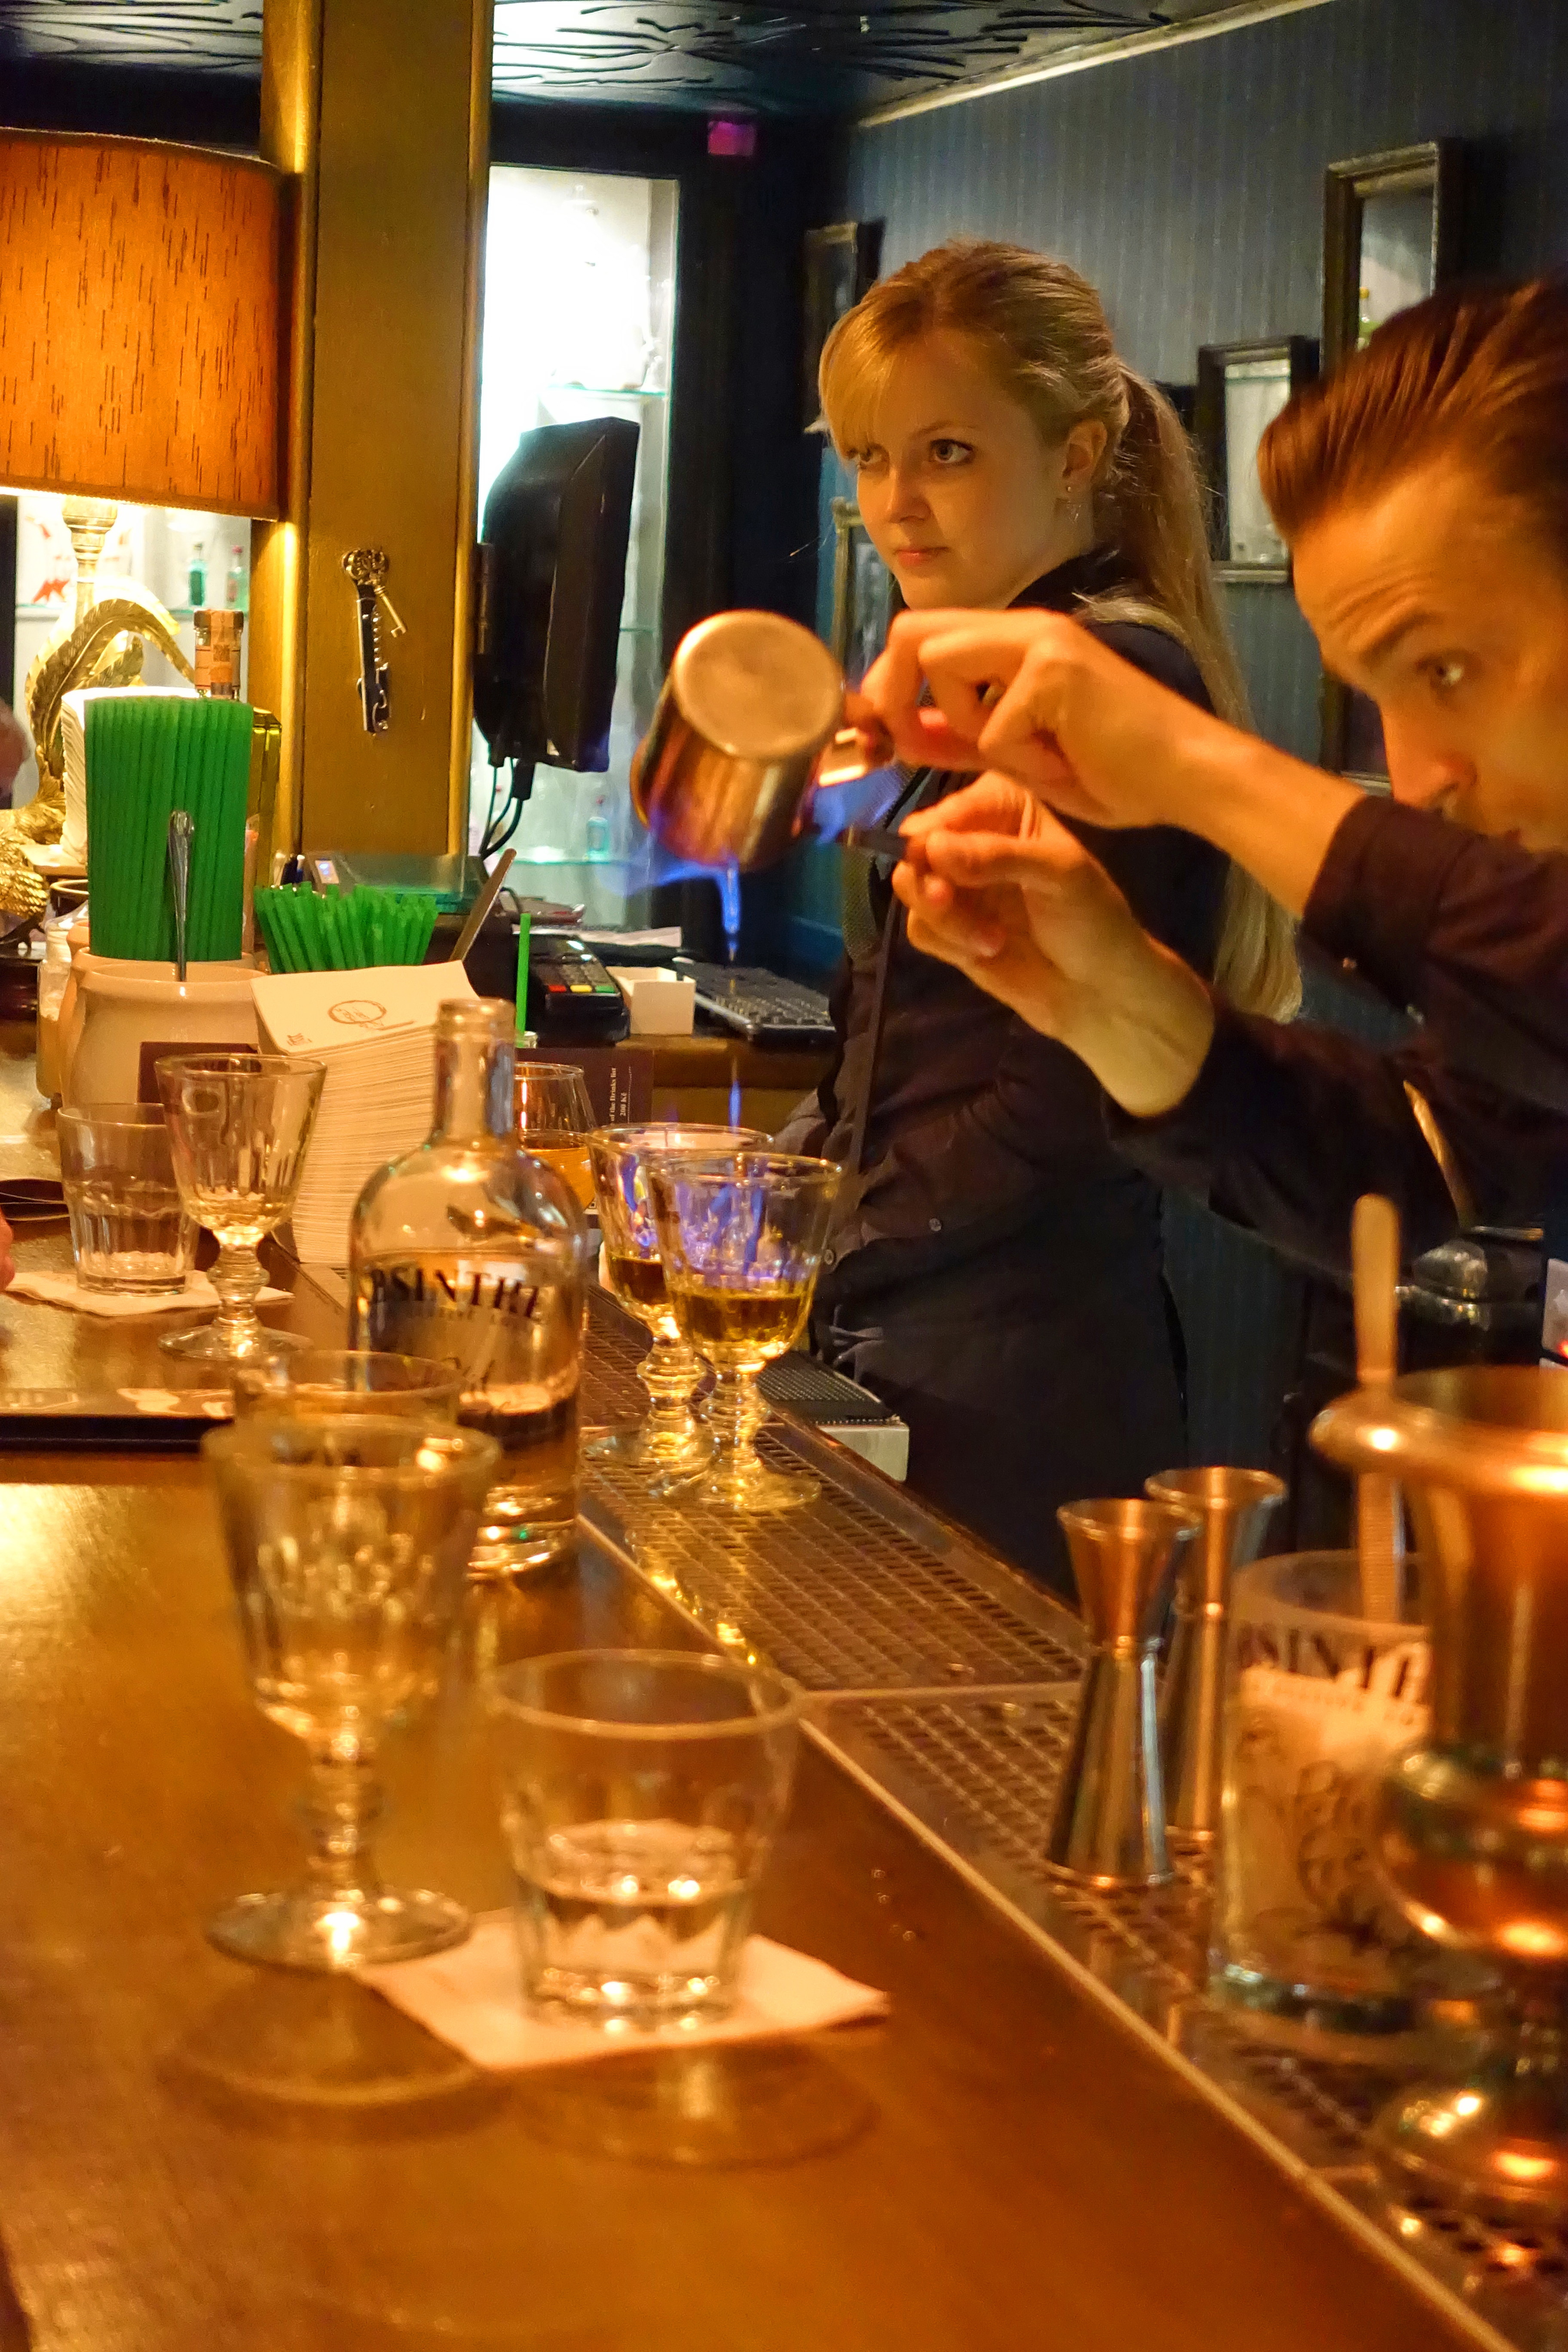 Attention to detail is important for an absinthe-tender.